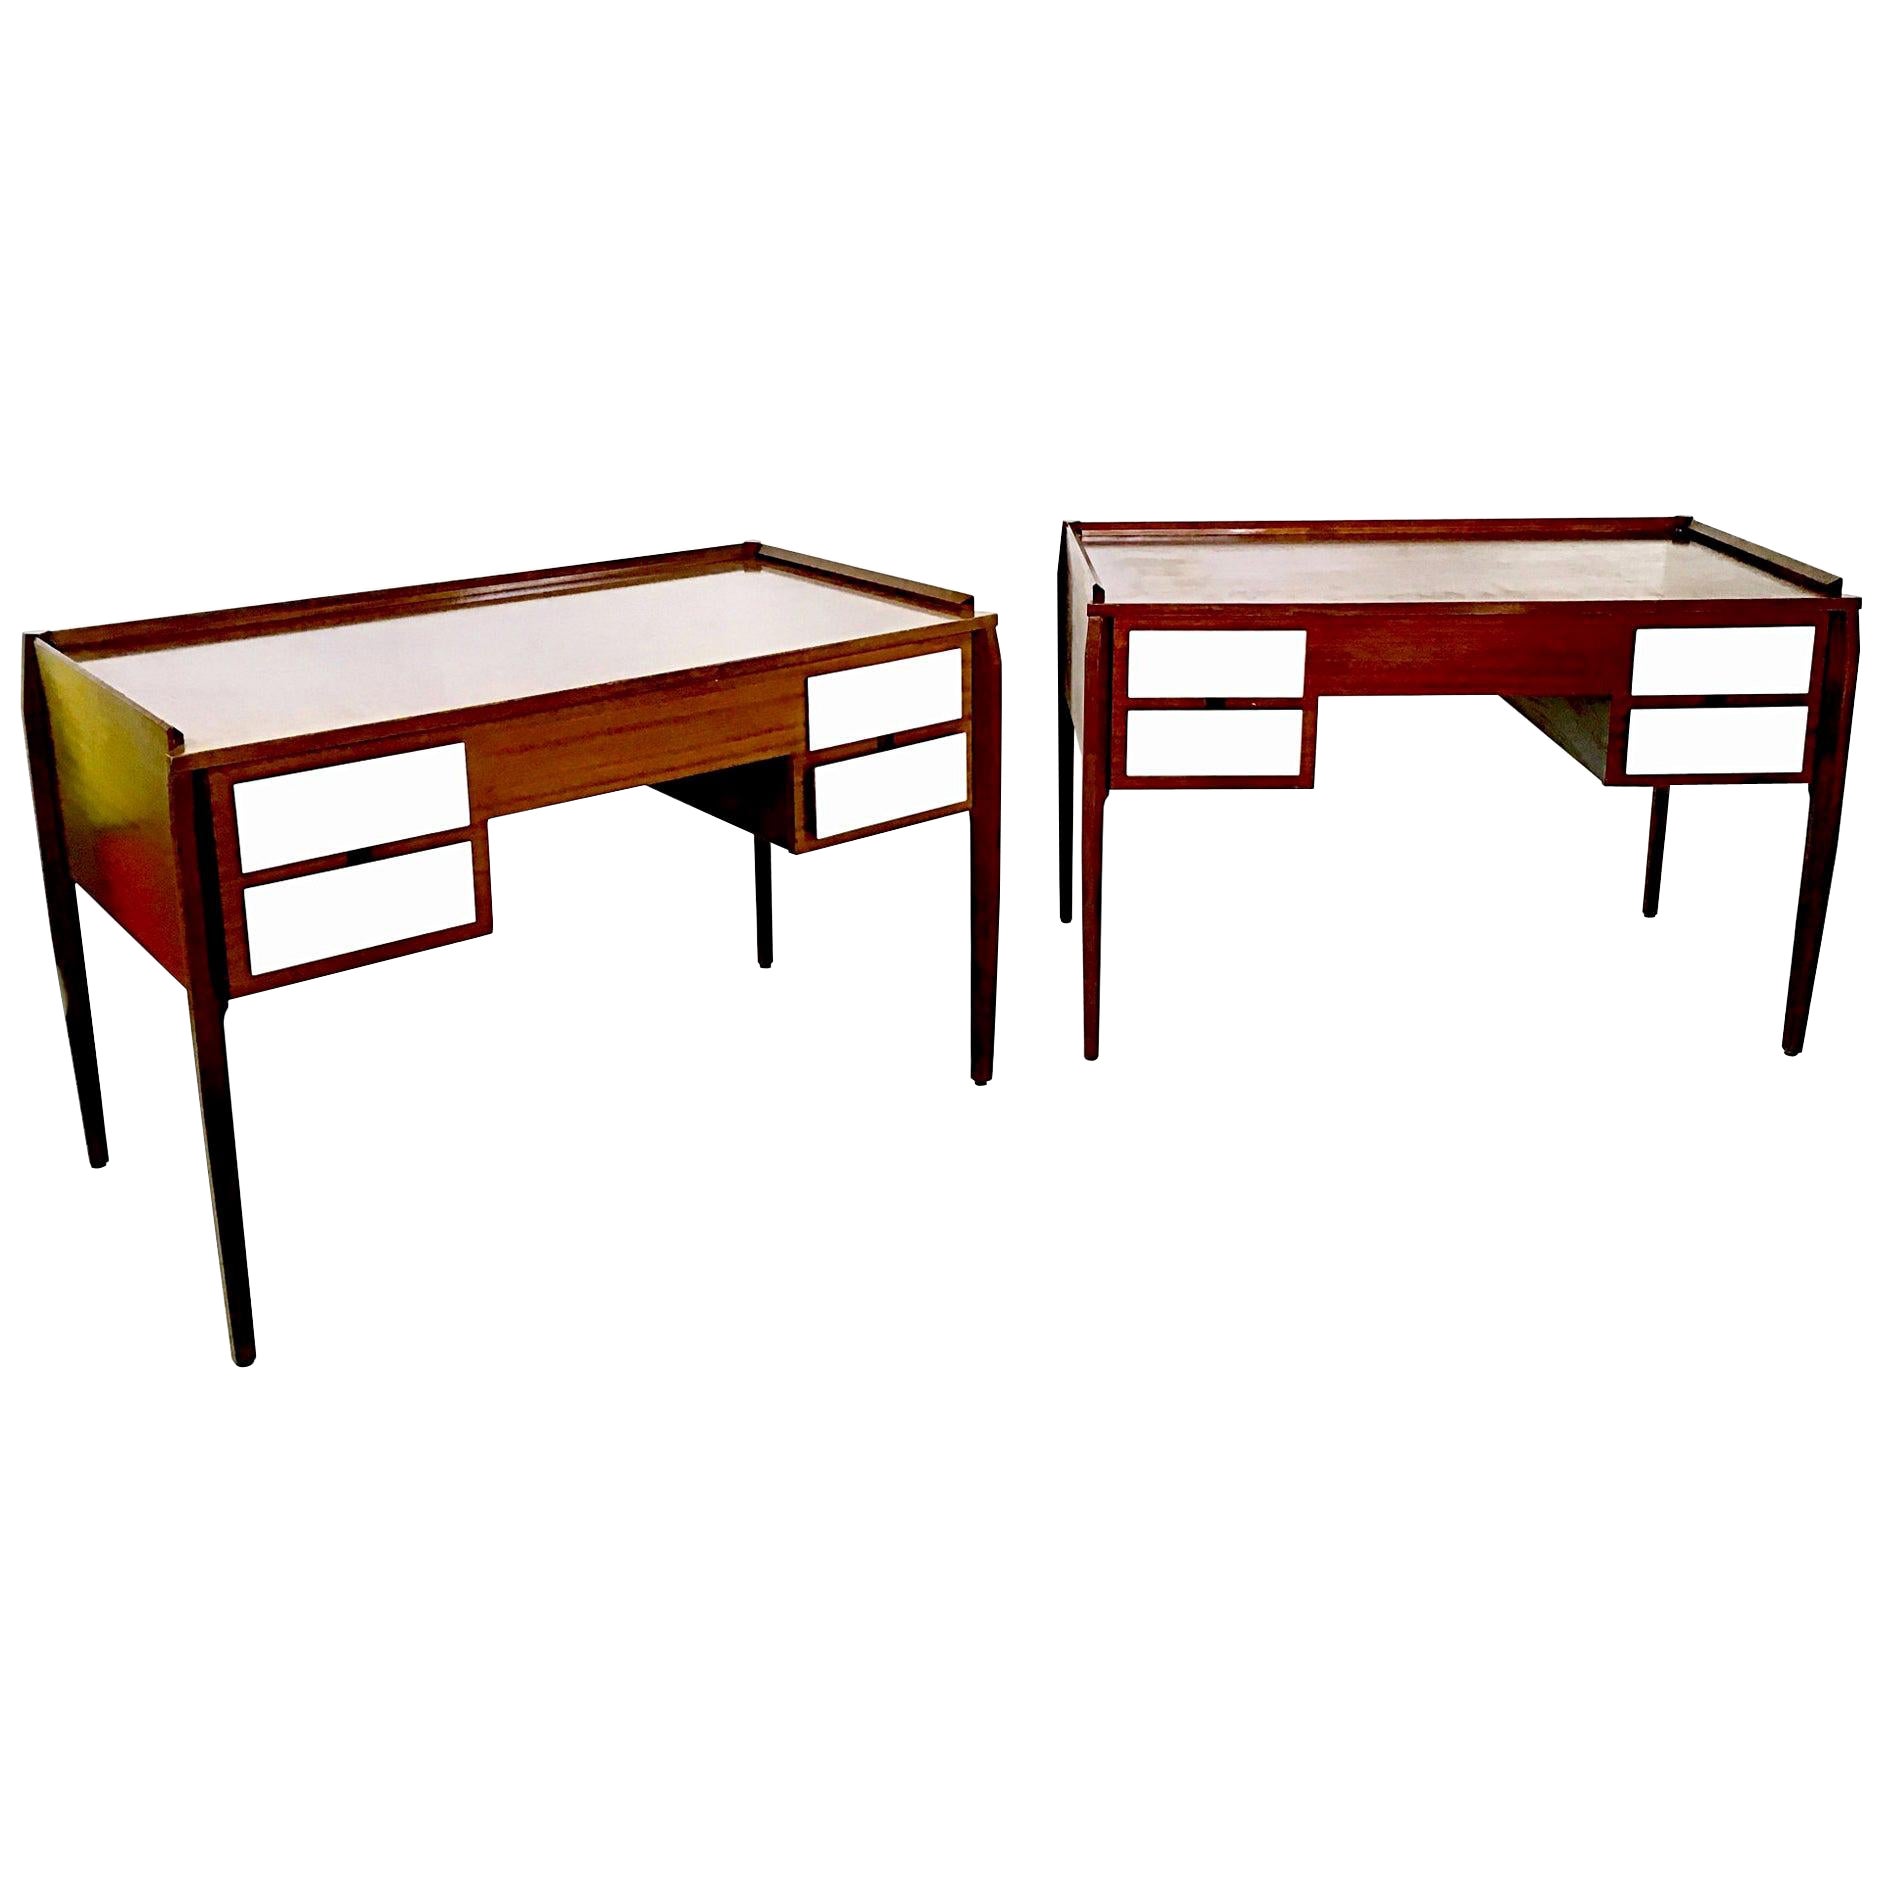 Pair of Vintage Ebonized Beech Writing Desks in the Style of Gio Ponti, Italy For Sale